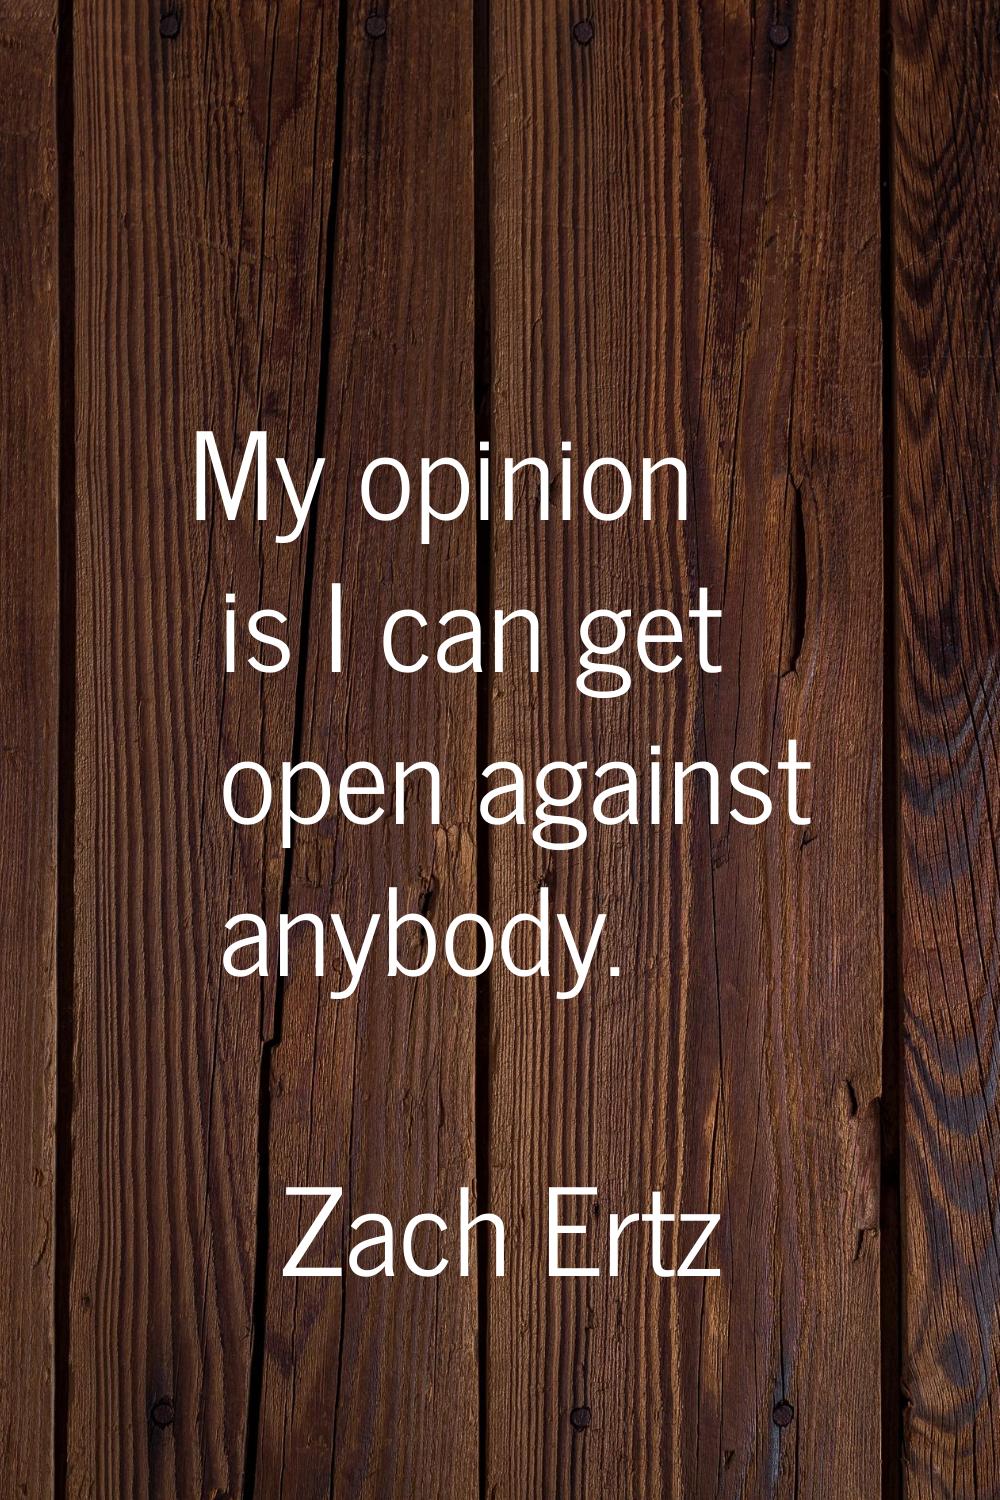 My opinion is I can get open against anybody.